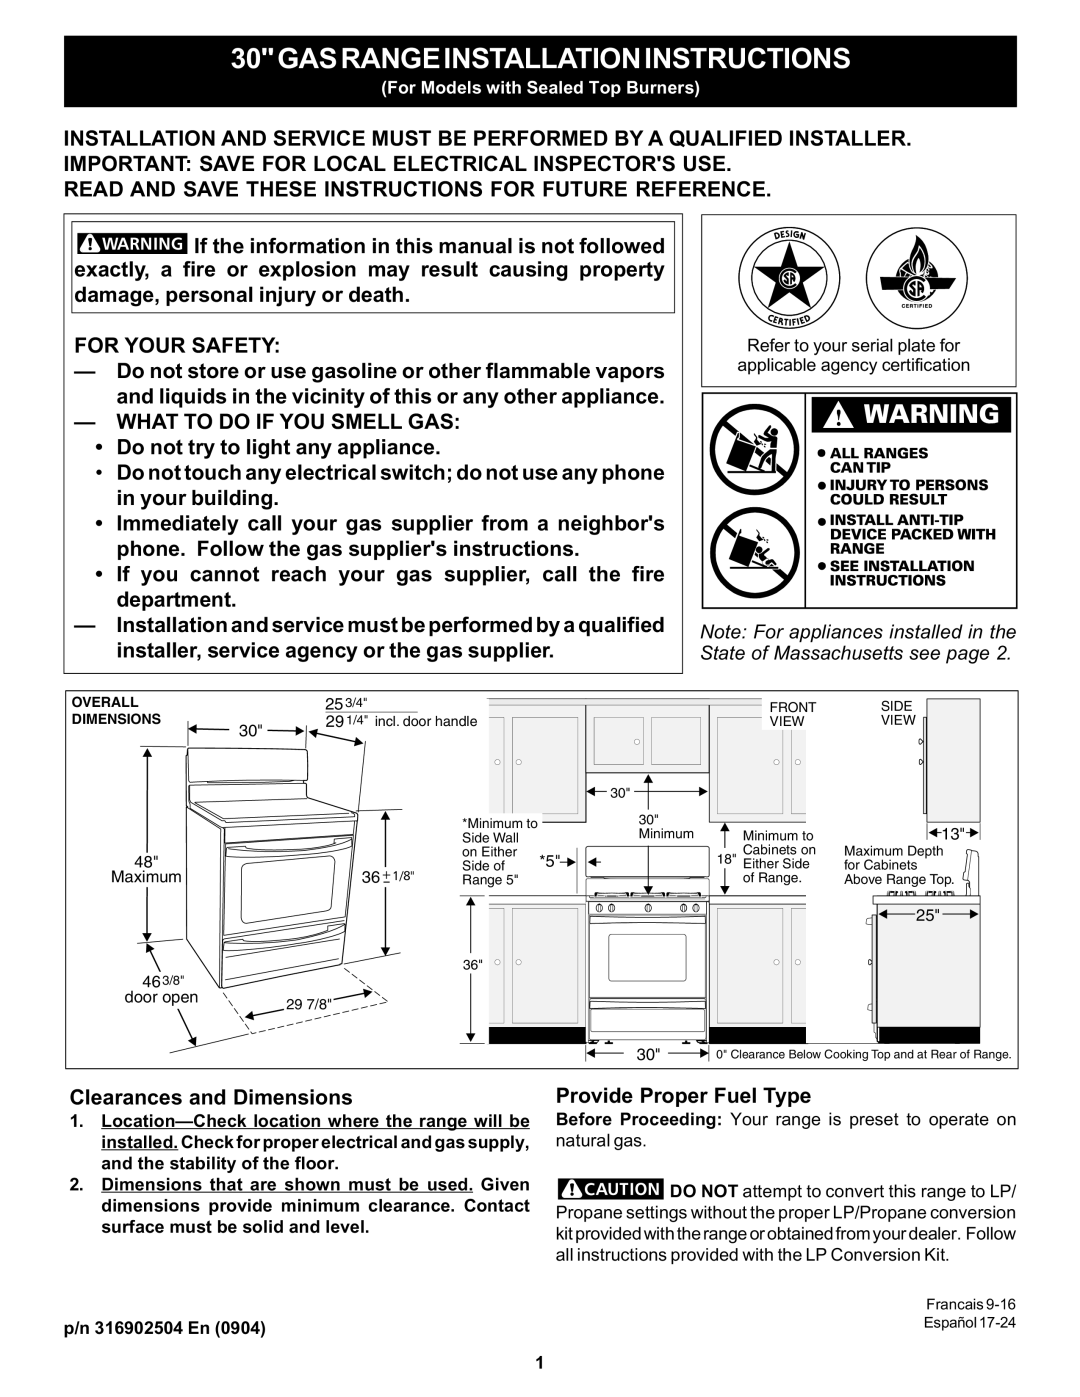 Bosch Appliances HGS5053UC manual 30GASRANGEINSTALLATIONINSTRUCTIONS, For Your Safety, What To Do If You Smell Gas 